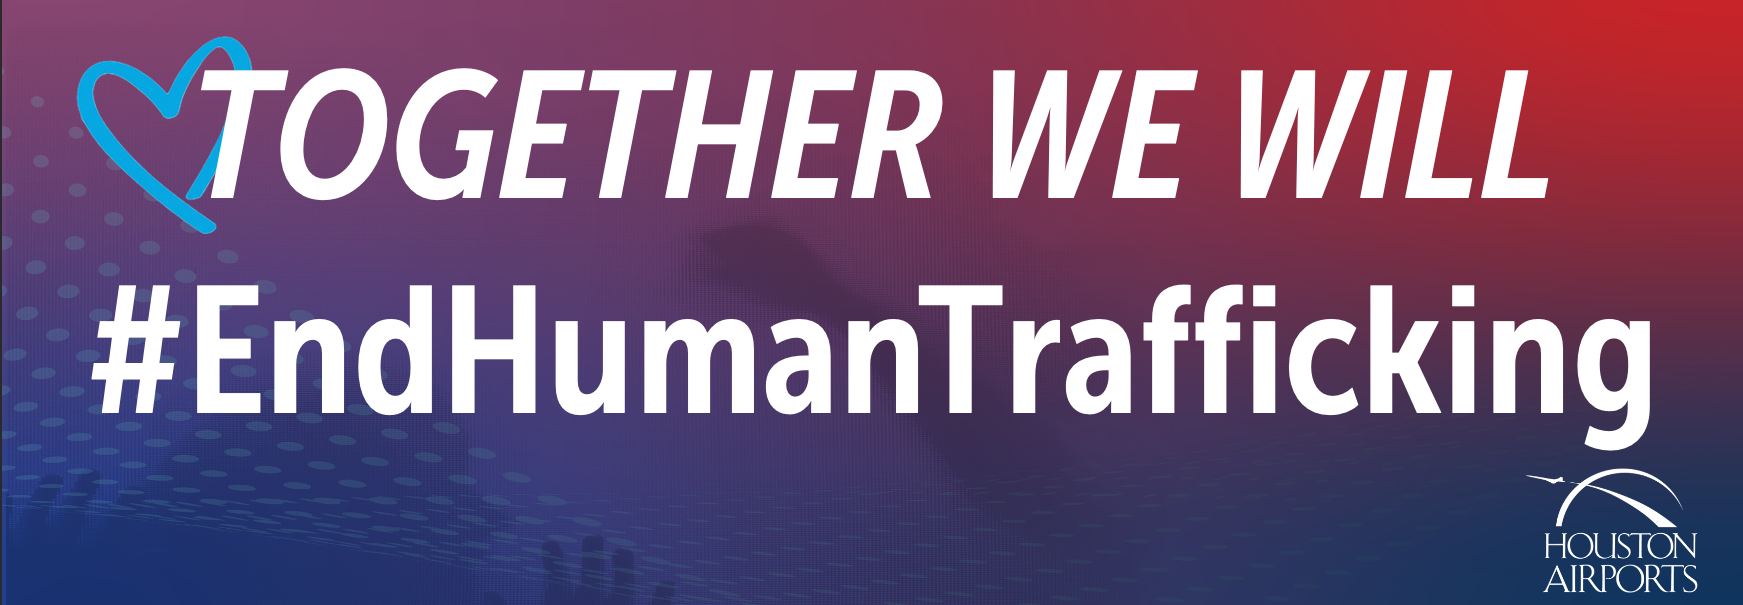 Together we will end human trafficking